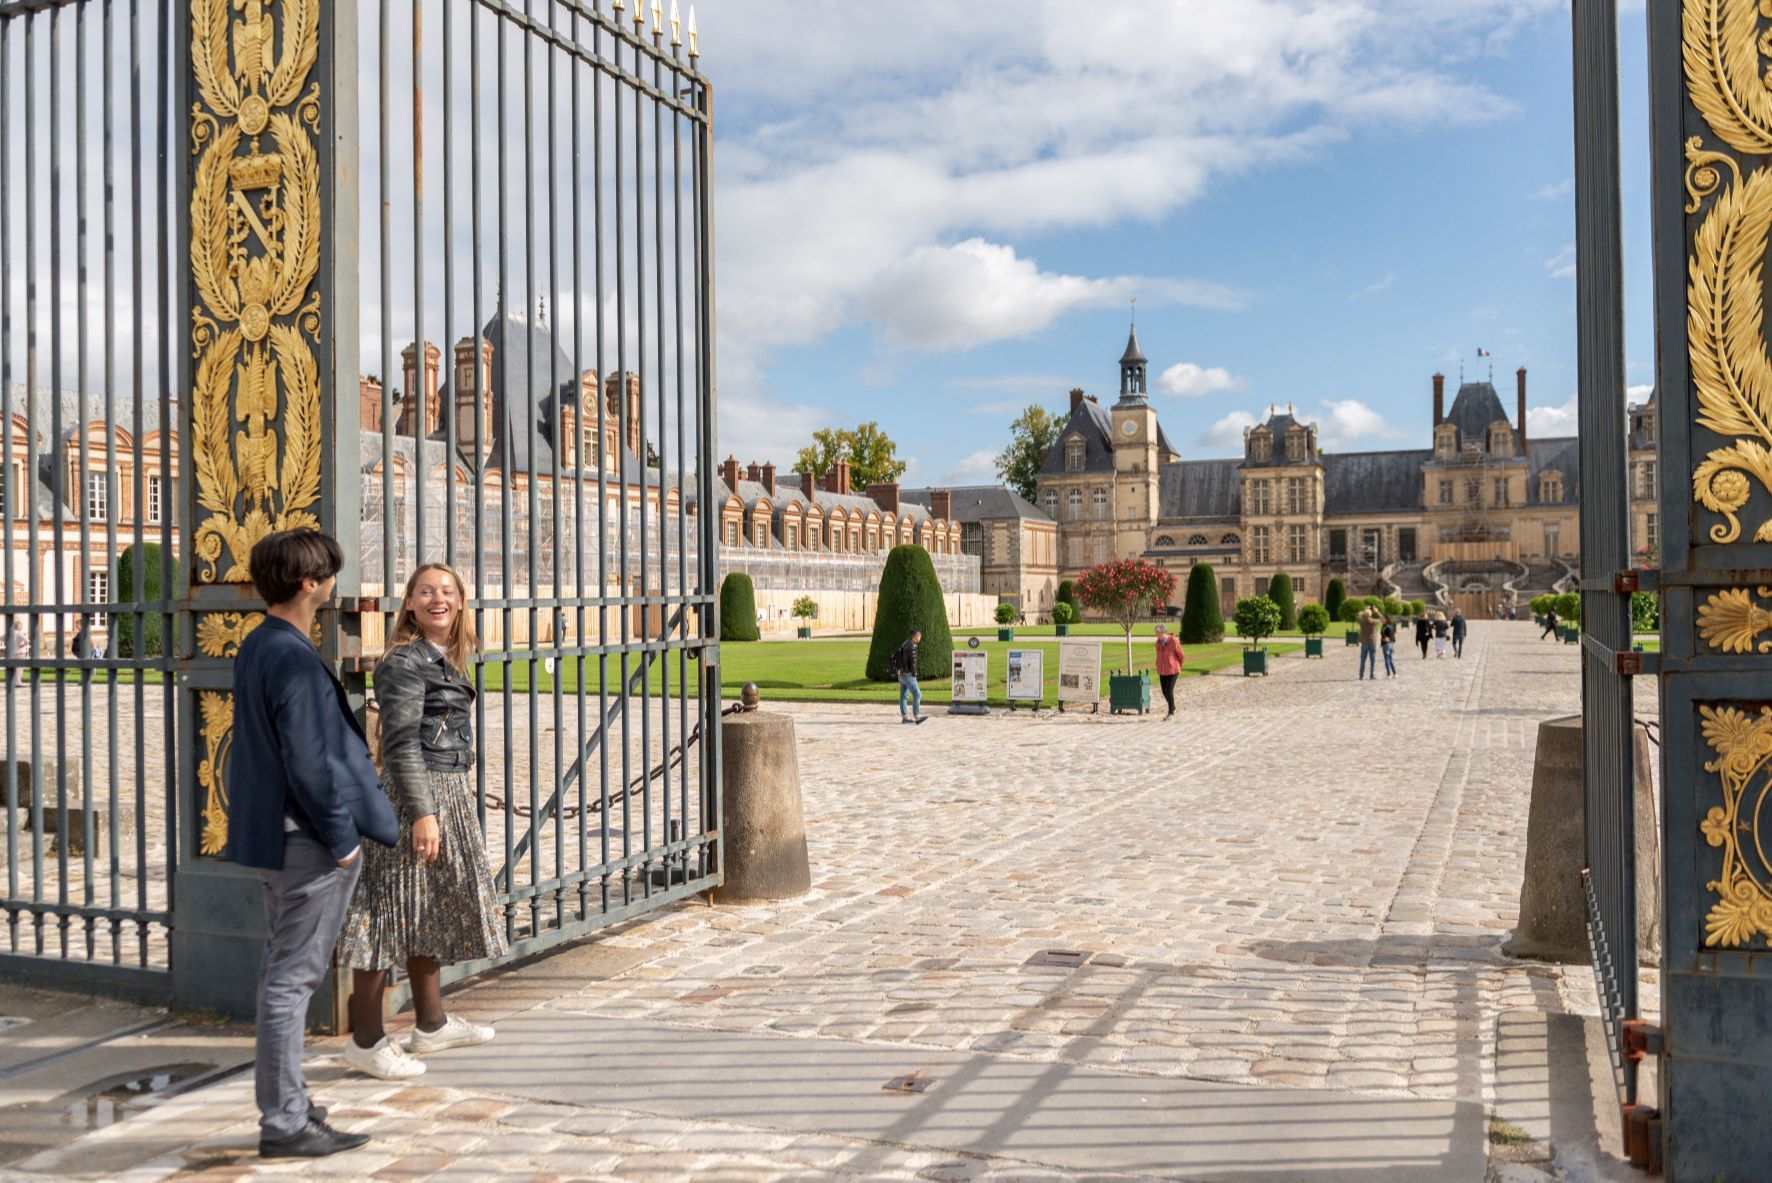 Discover Fontainebleau Castle at your own pace